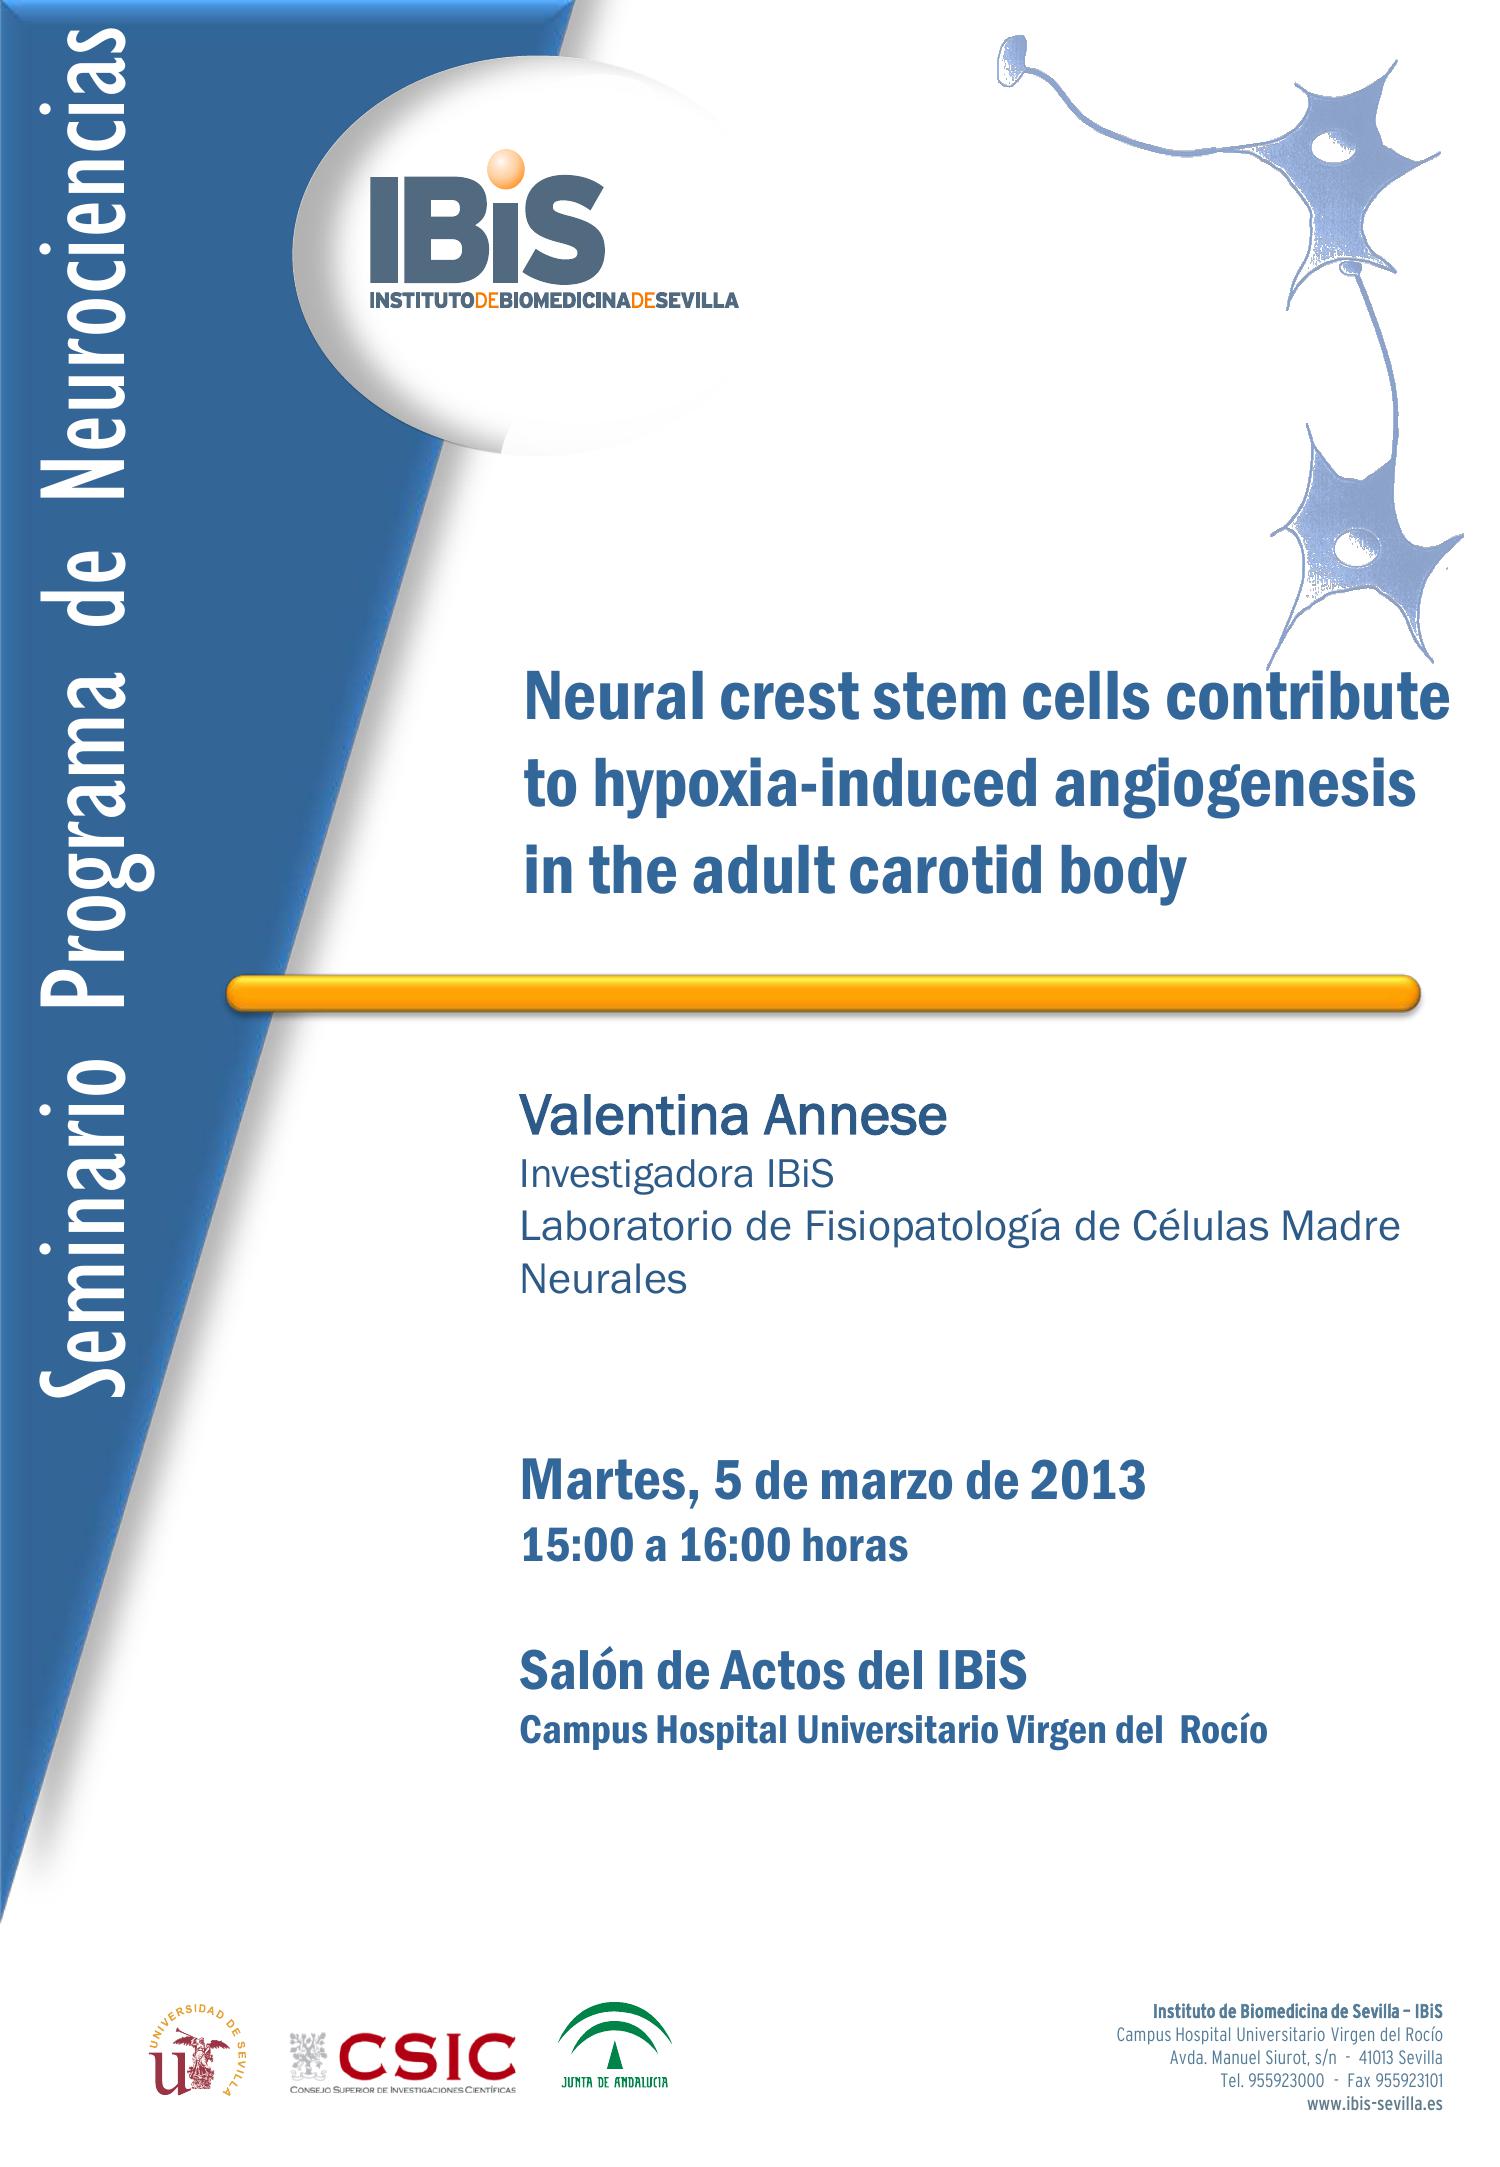 Poster: Neural crest stem cells contribute to hypoxia-induced angiogenesis in the adult carotid body.